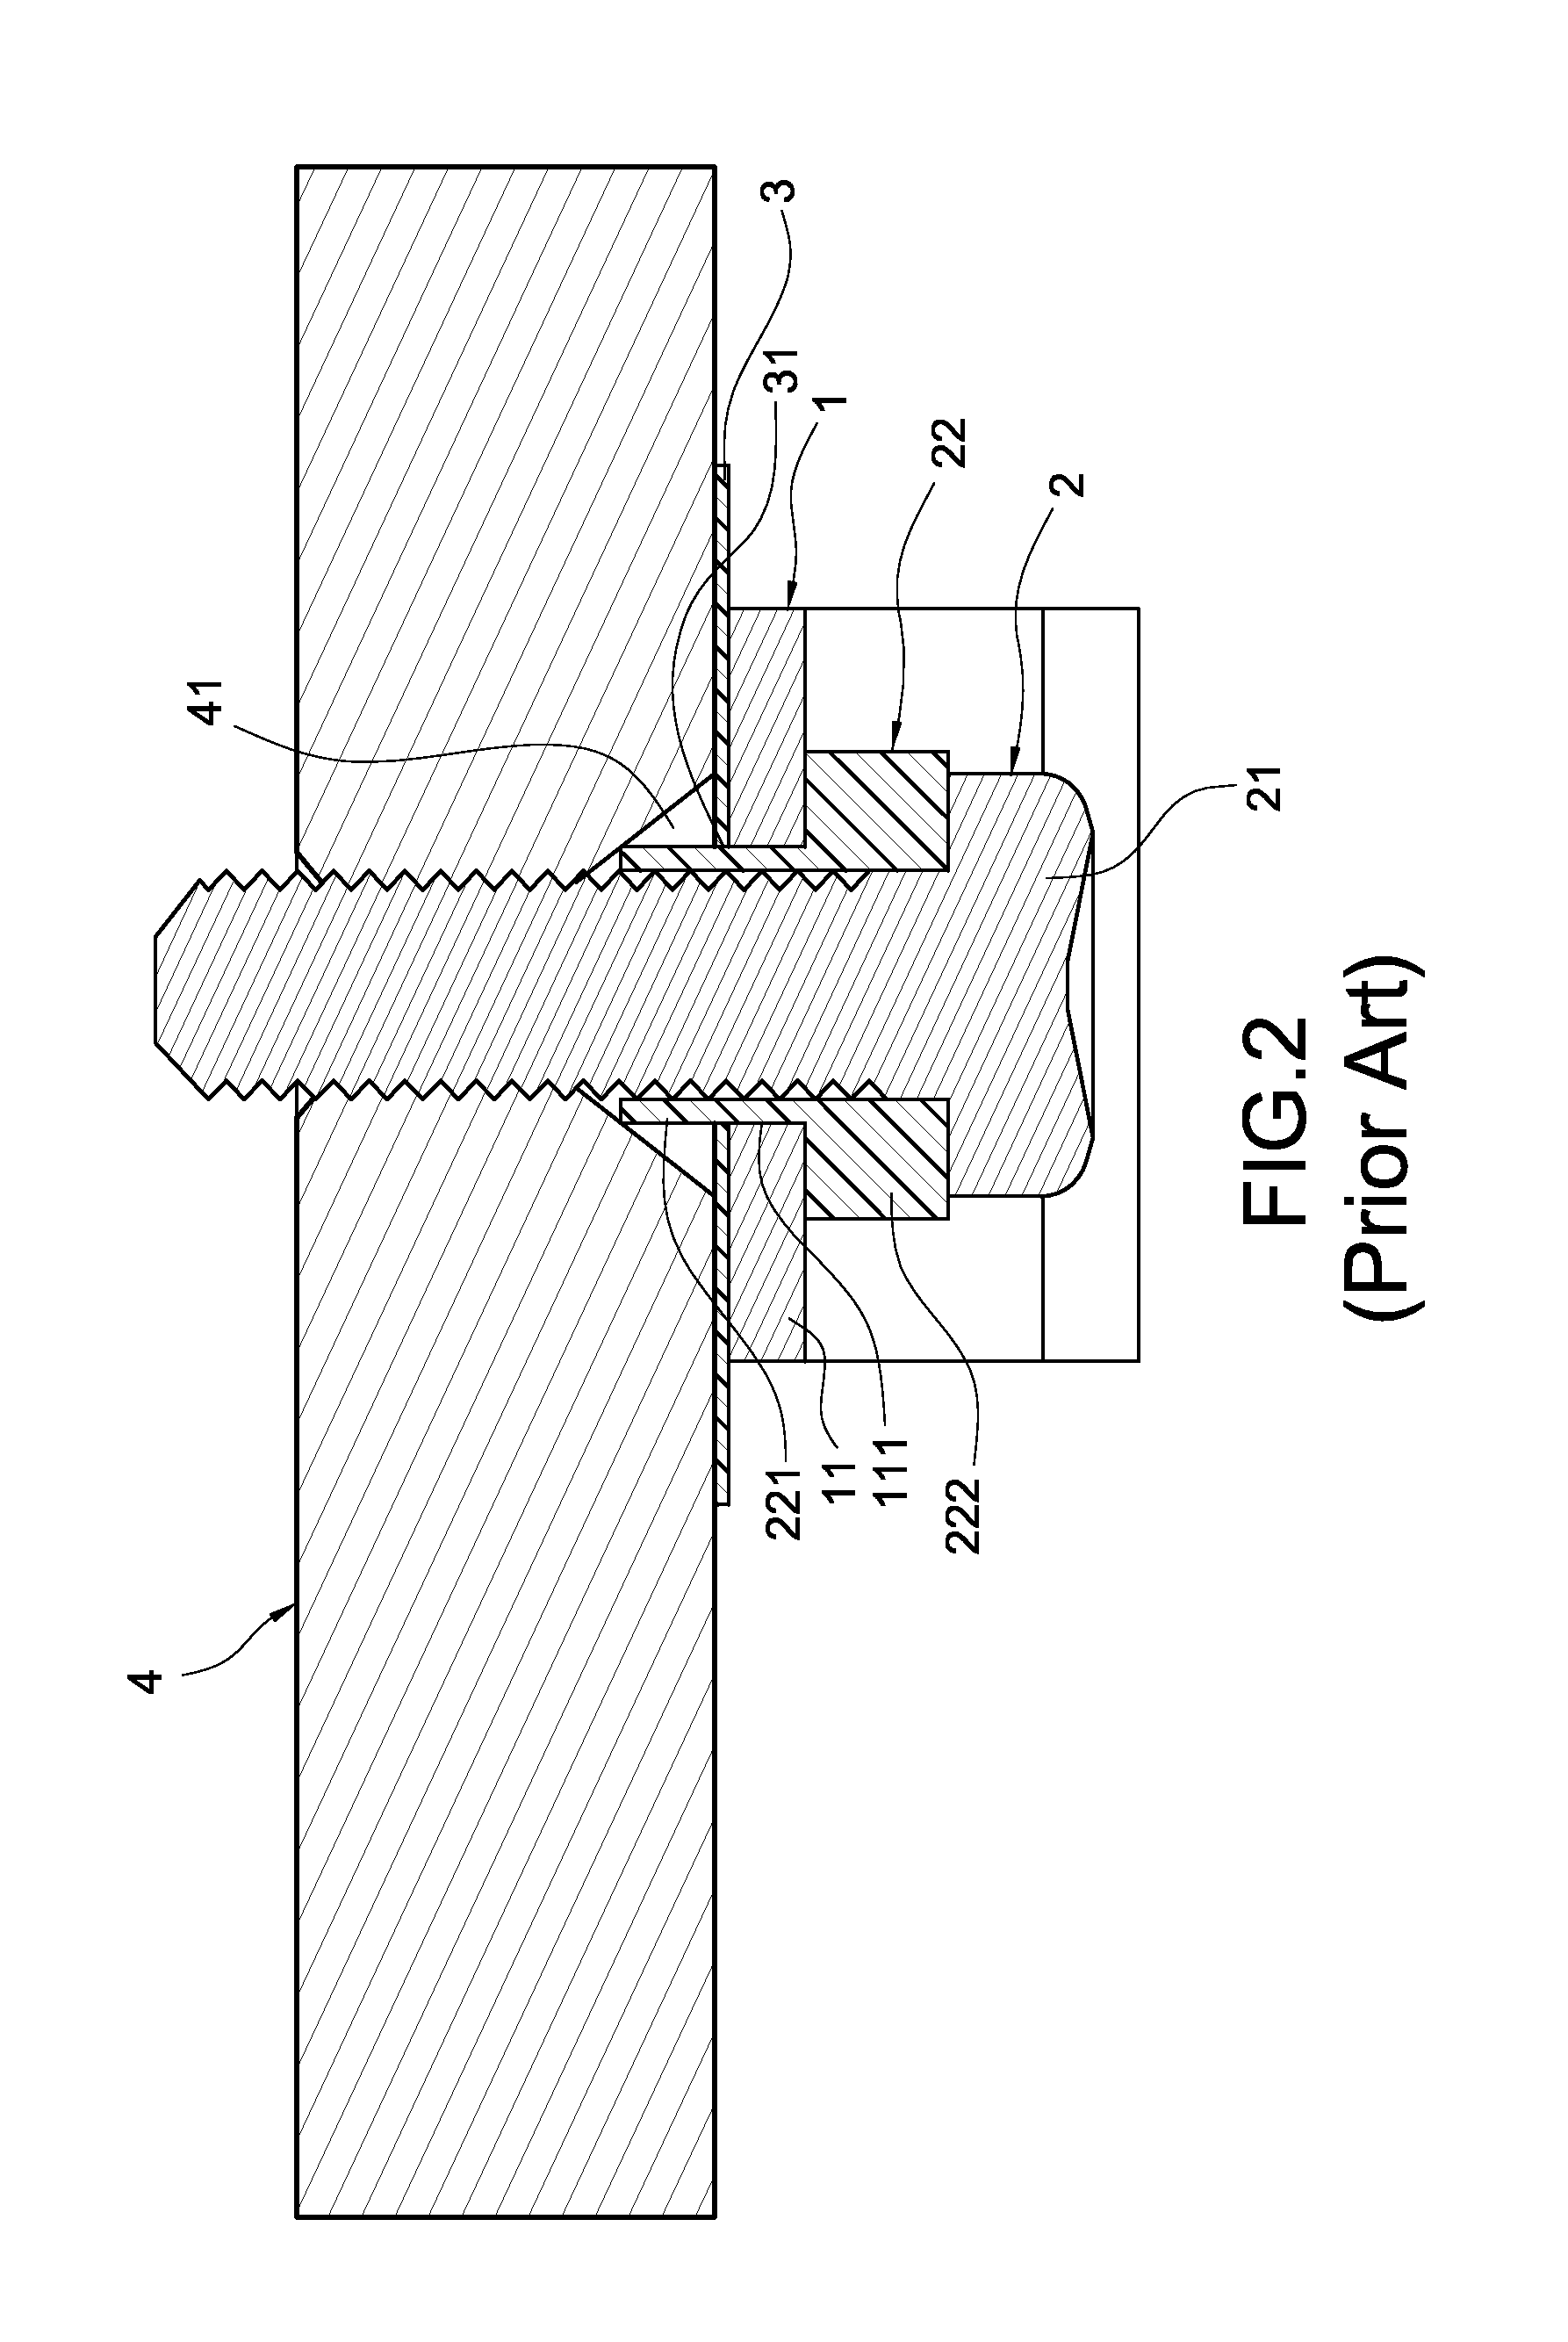 Integrated device of heat dissipation unit and package component and a fastening structure for the same